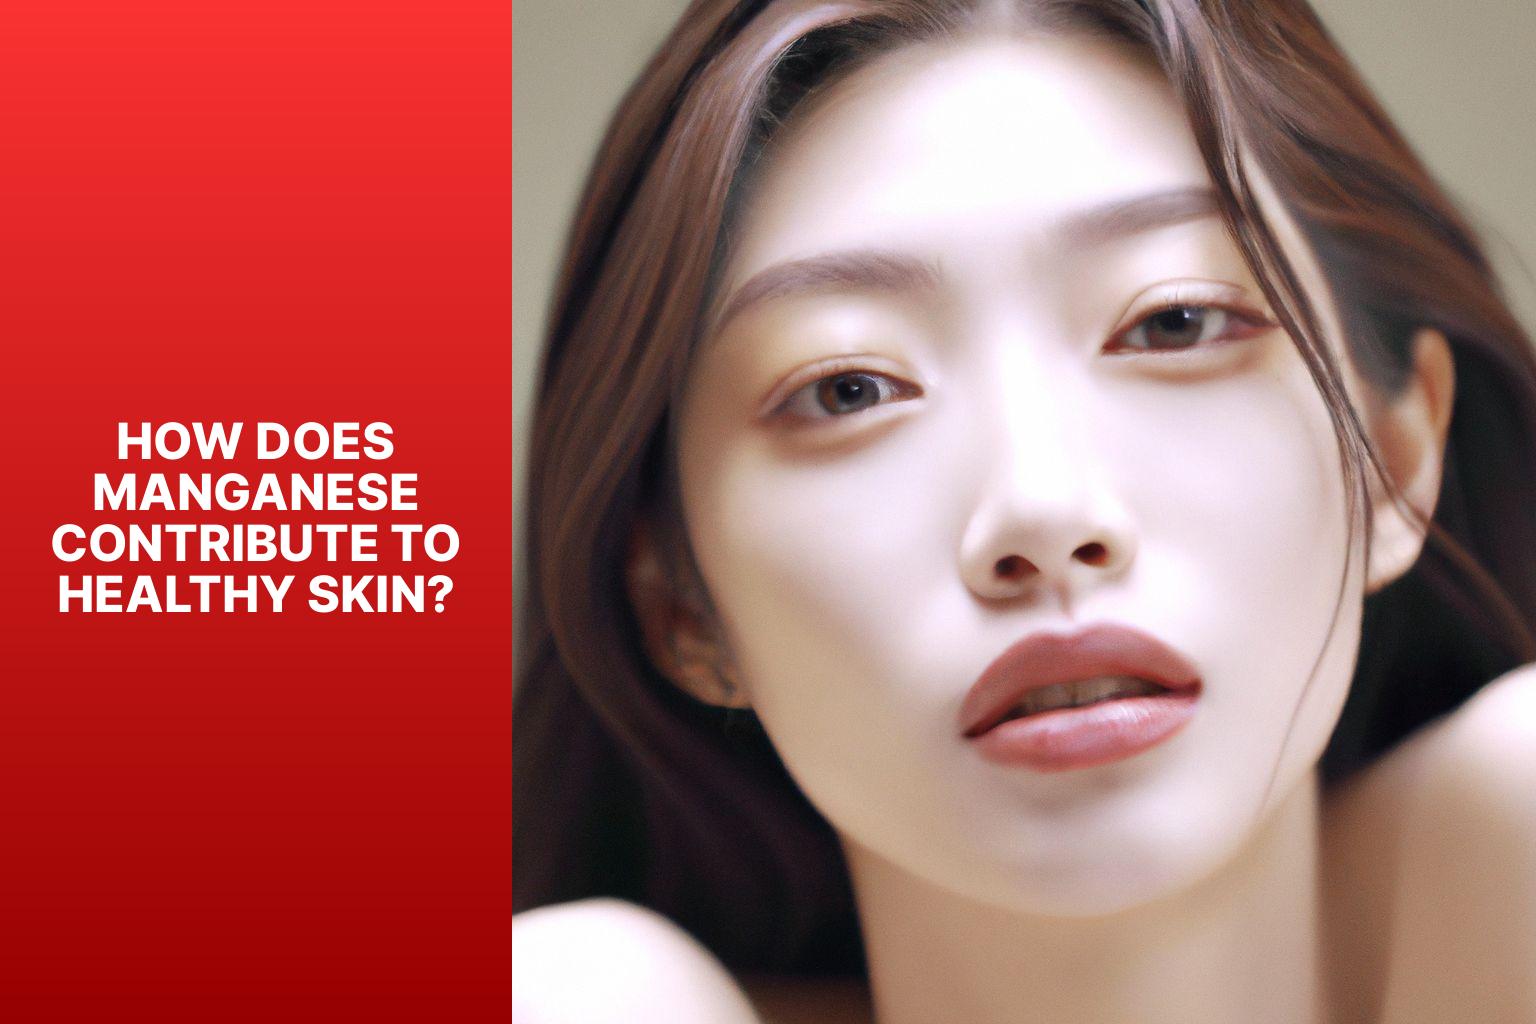 How Does Manganese Contribute to Healthy Skin? - Unlocking the Beauty Benefits of Manganese: Delve into how manganese contributes to healthy skin, hair, and nails. 